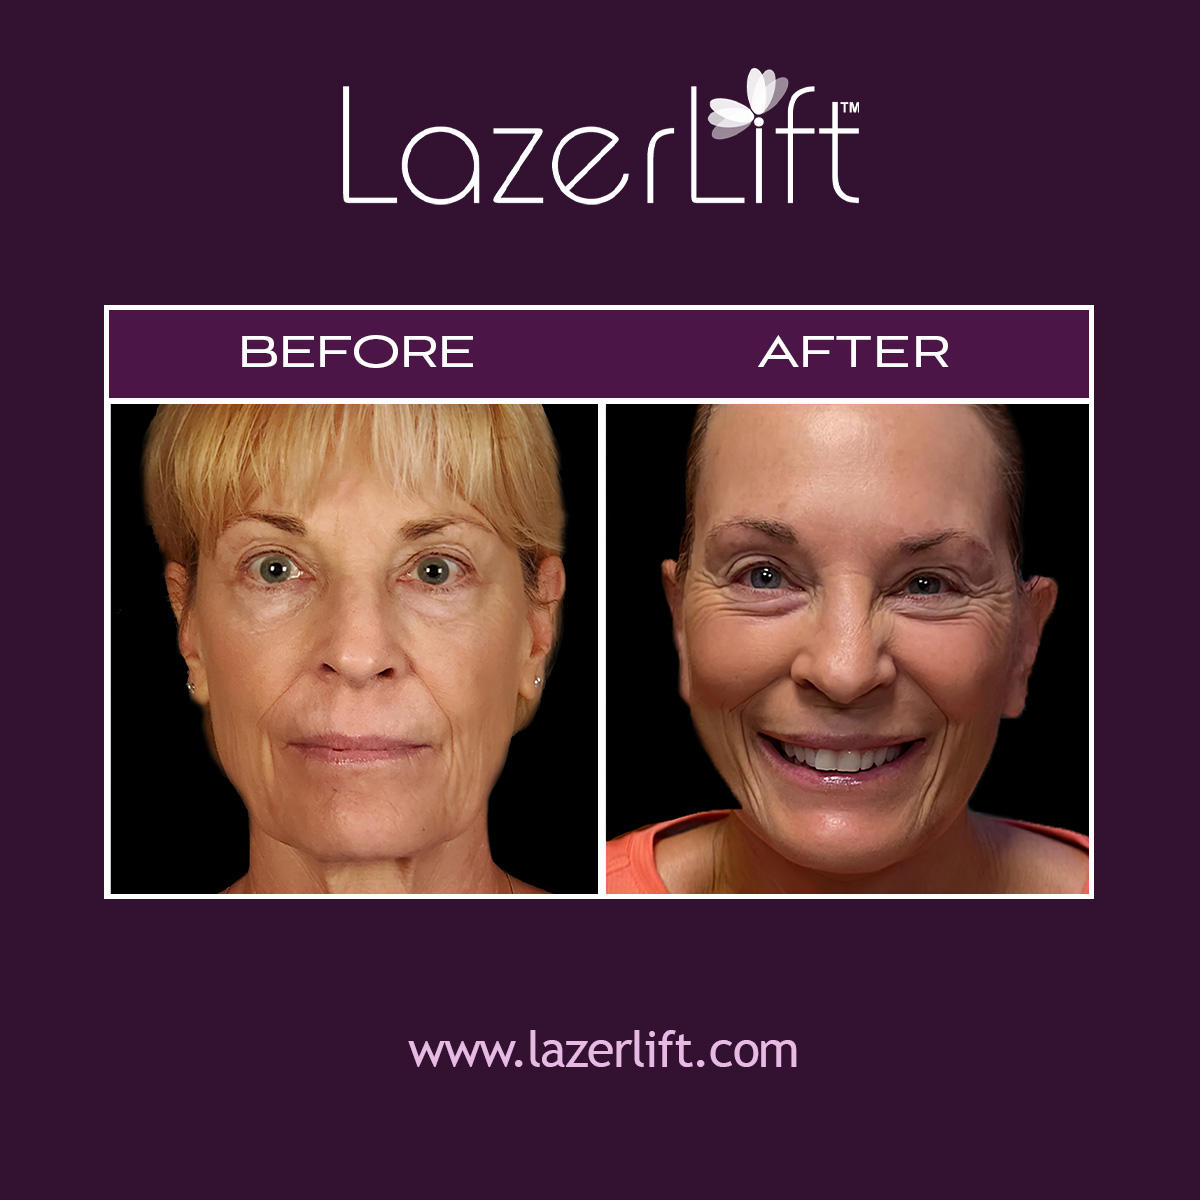 LazerLift® is a minimally-invasive solution to facial aging. LazerLift® uses revolutionary laser technology to tighten and lift the skin, increase collagen production and create long-lasting results. The procedure takes as little as 30 minutes to perform in-office. Most patients are able to drive themselves home and continue normal activities immediately after undergoing the procedure.